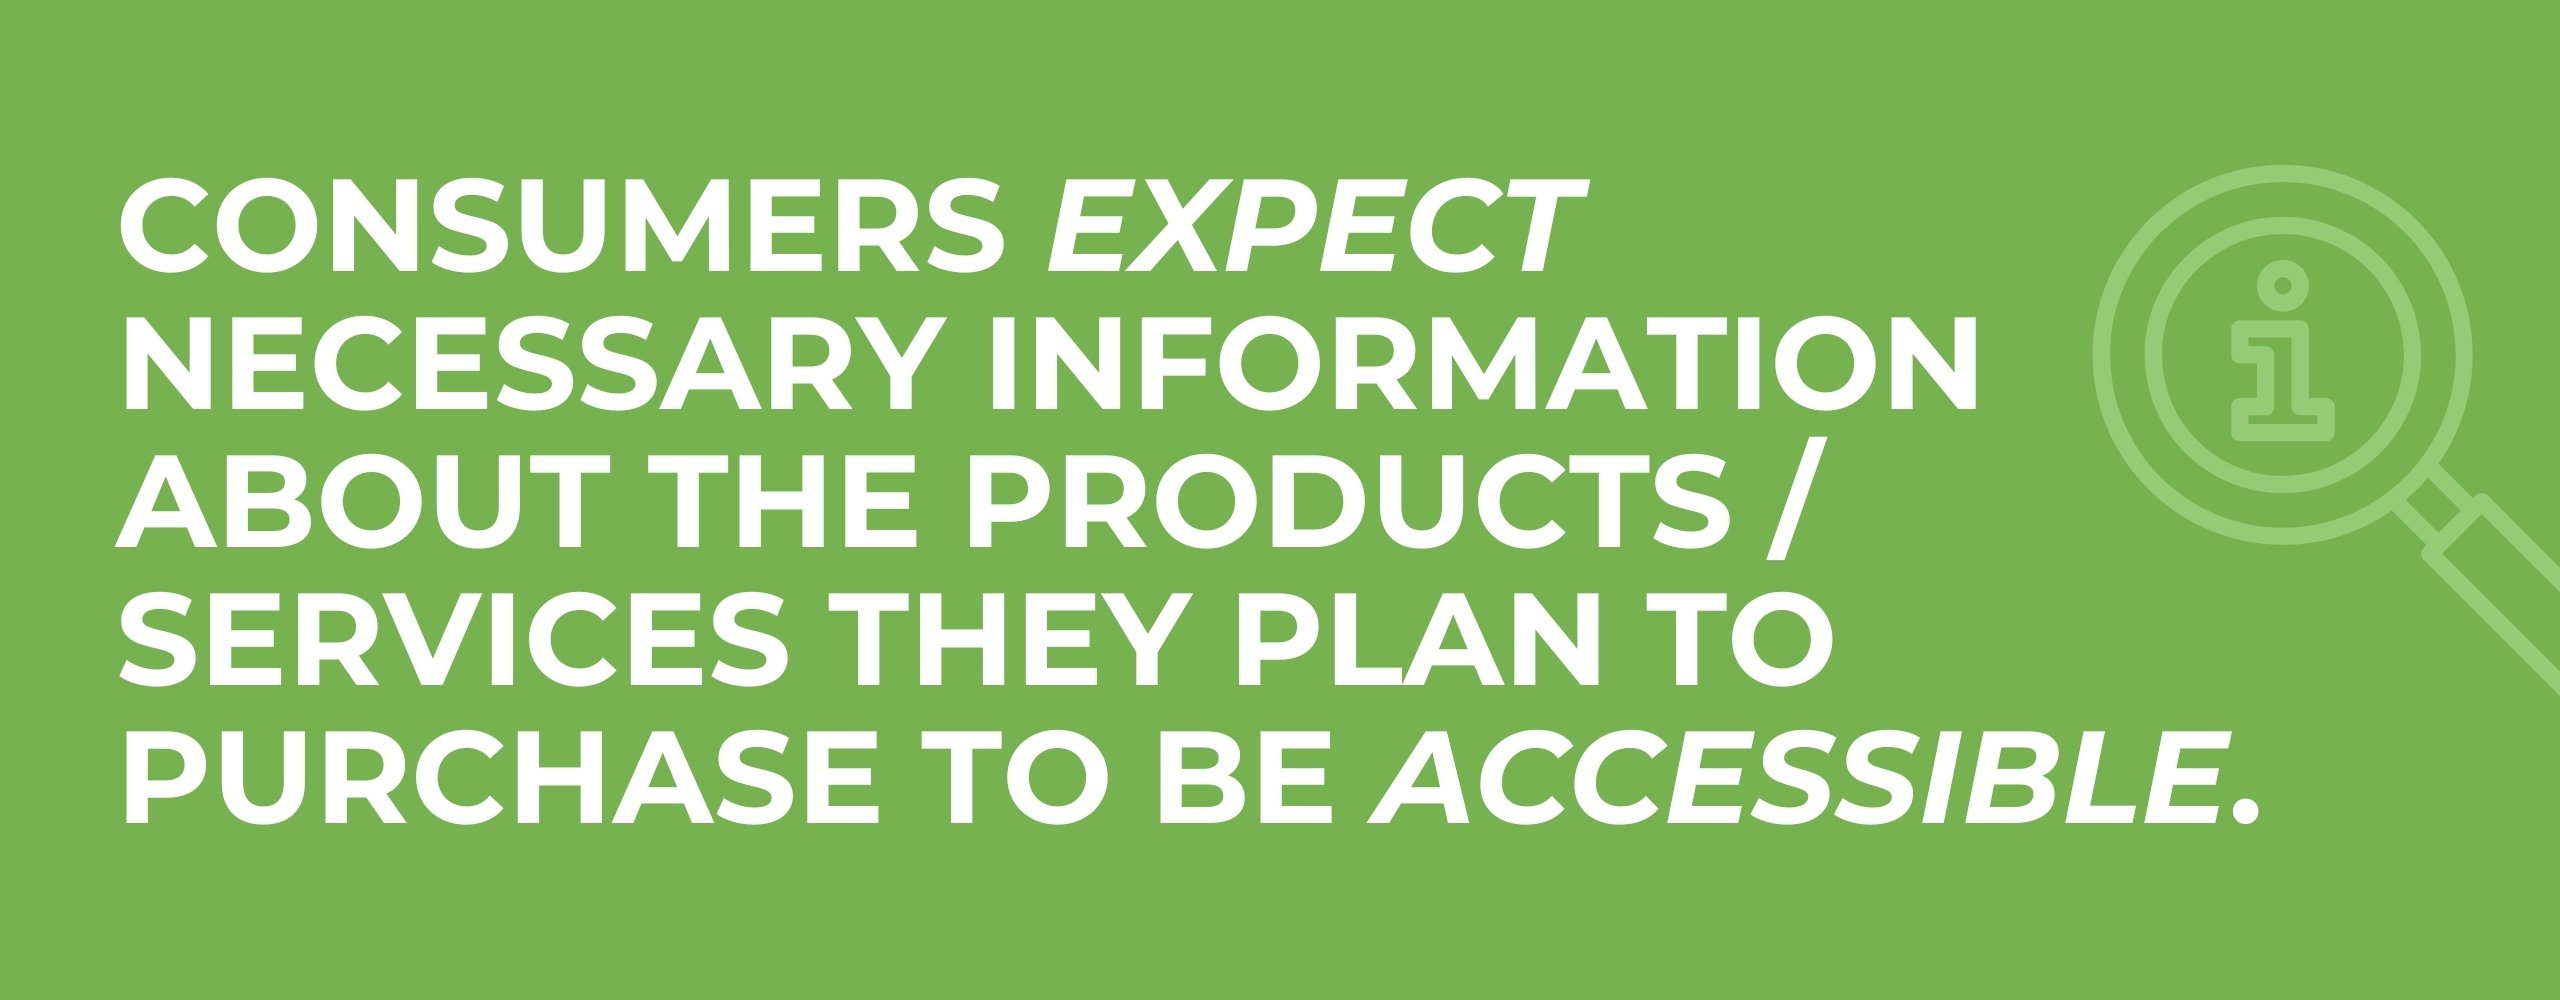 customers-expect-information